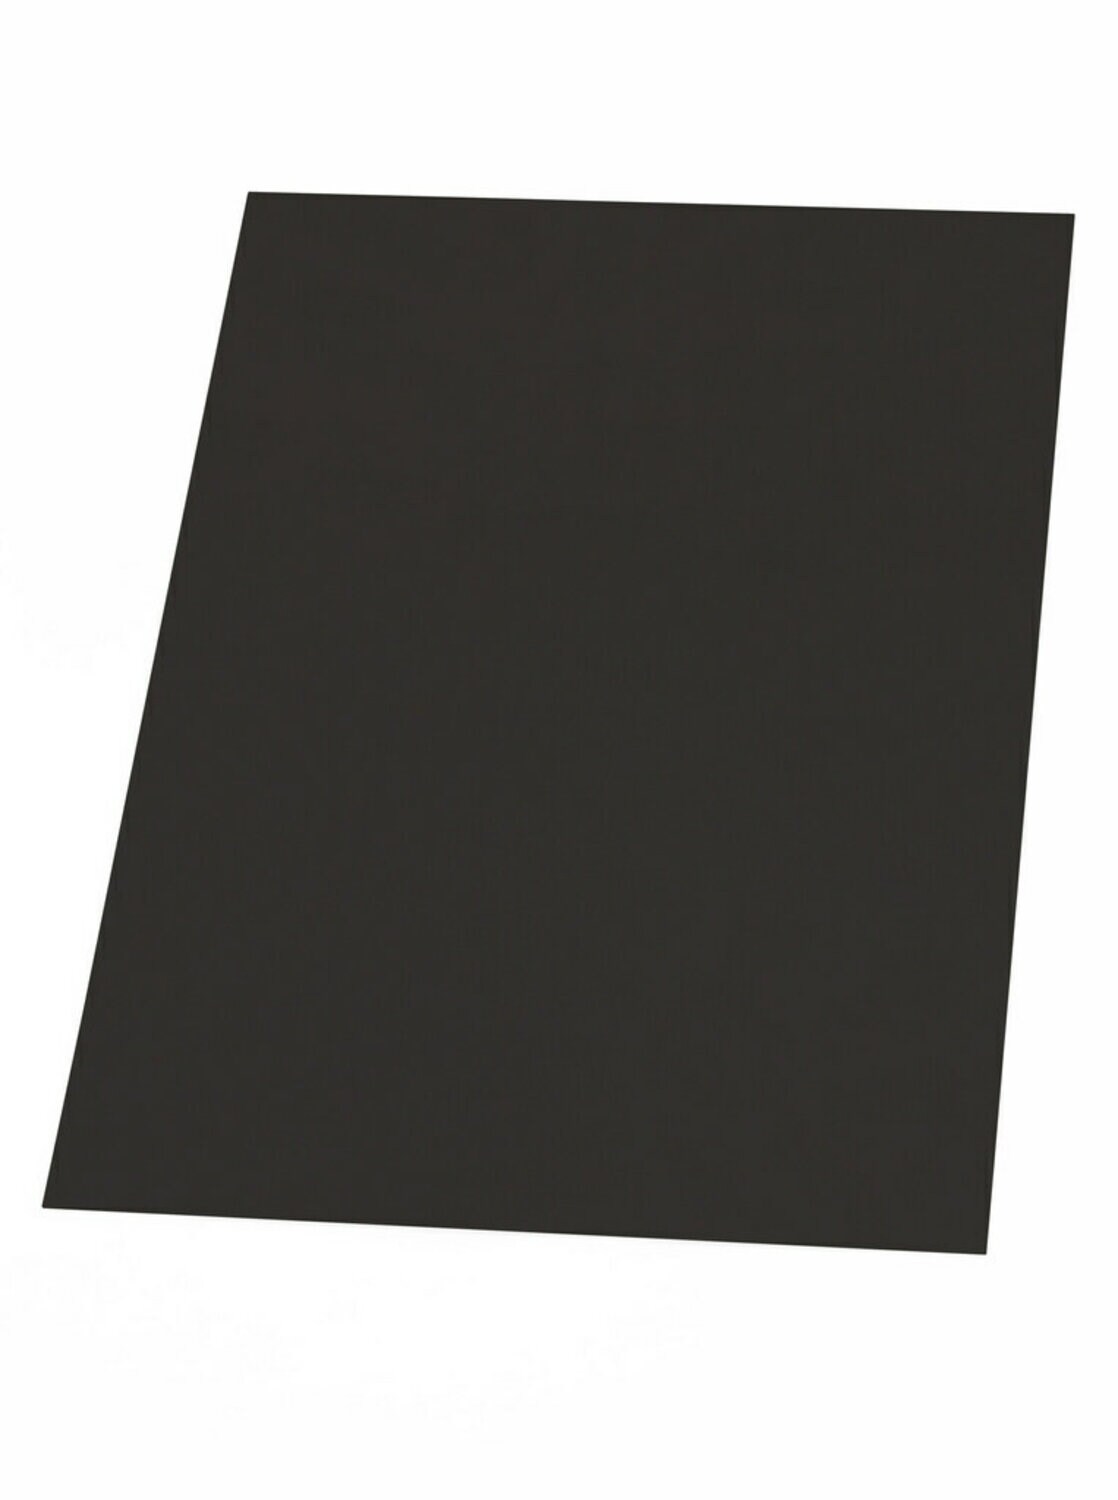 7010352906 - 3M Thermally Conductive Interface Pad Sheet 5595S, 210 mm x 300 mm 0.5
mm, 80/Case